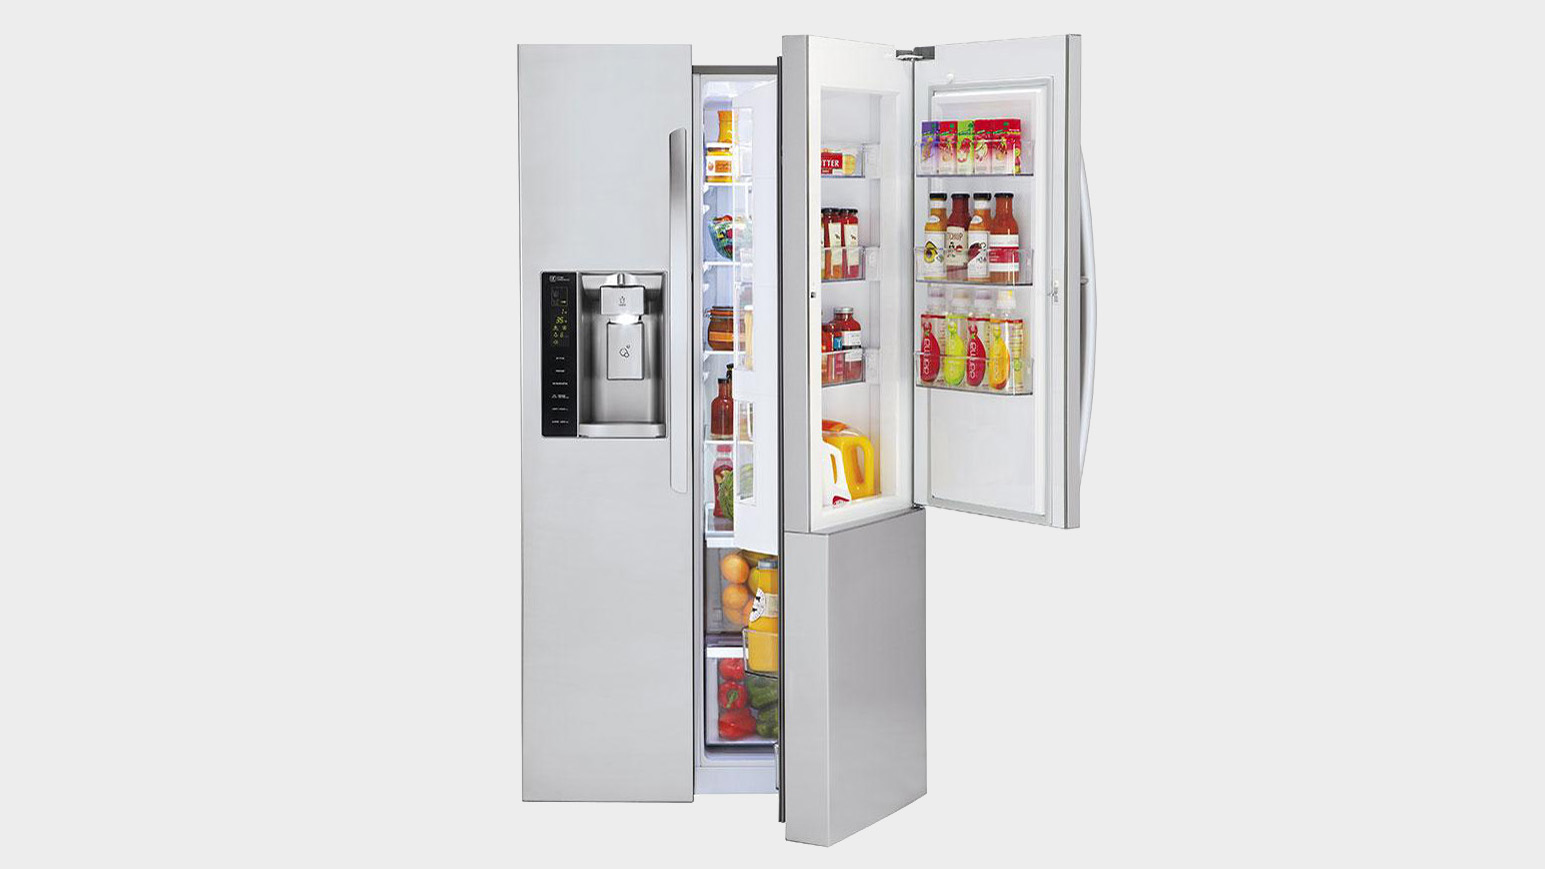 LG LSXS26366S Side-by-Side Refrigerator Review